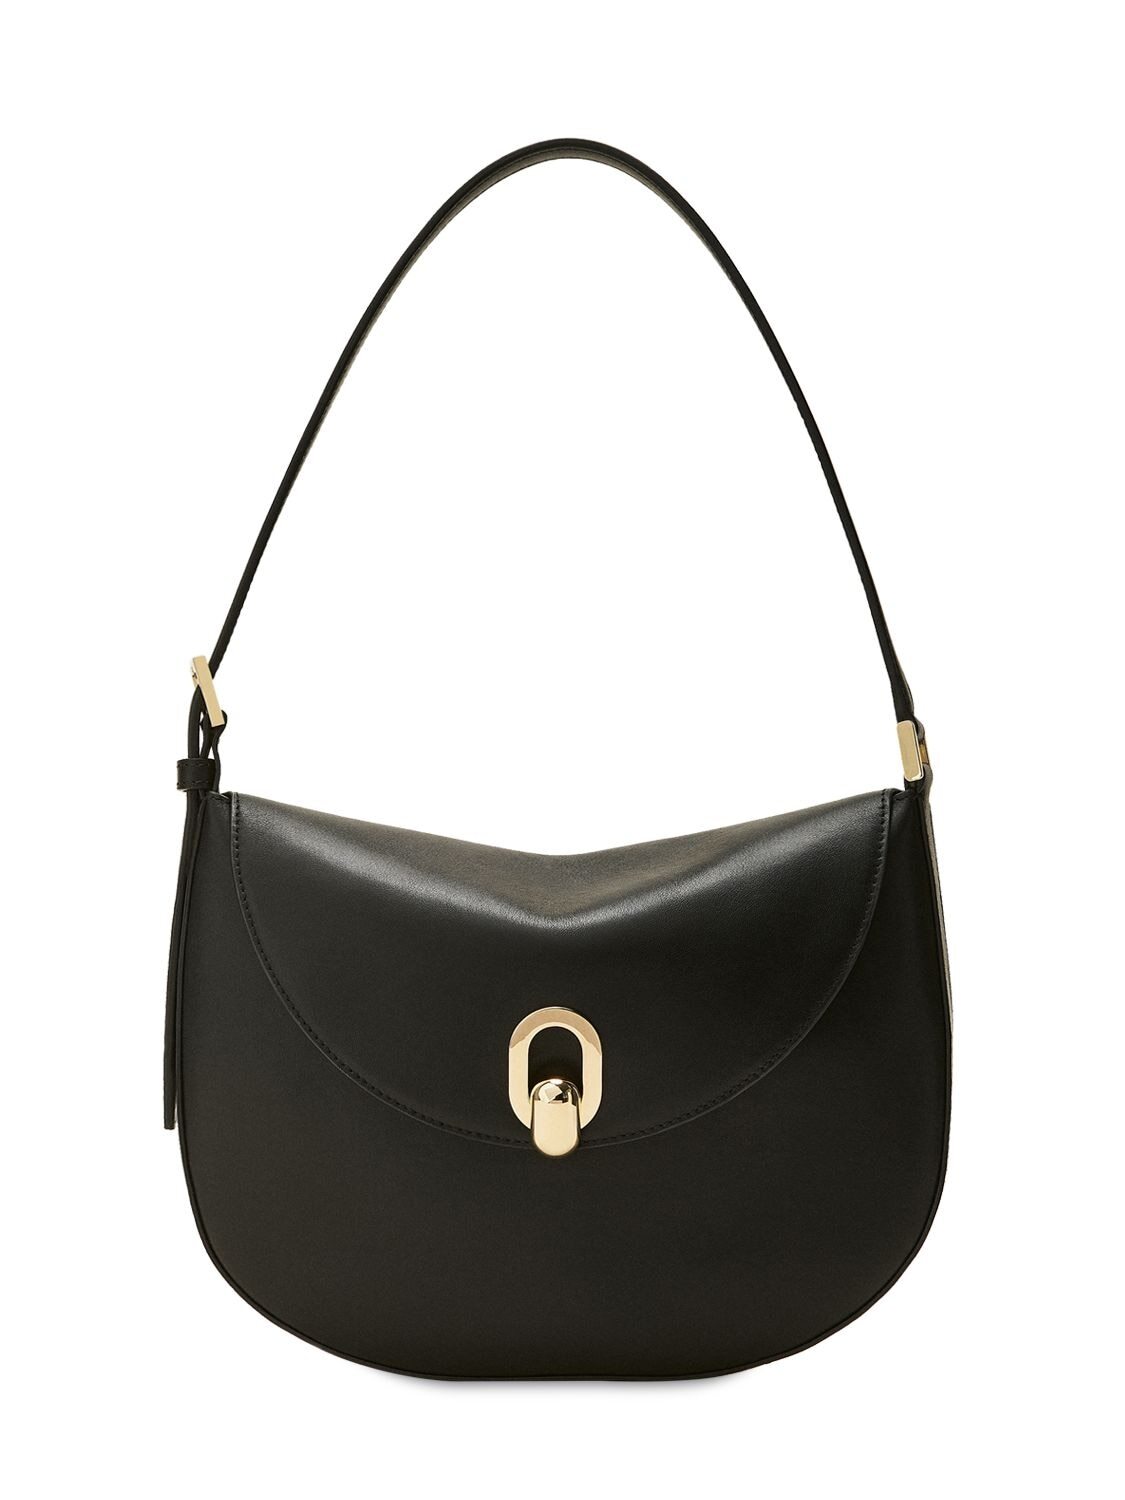 SAVETTE The Tondo Smooth Leather Hobo Bag in black